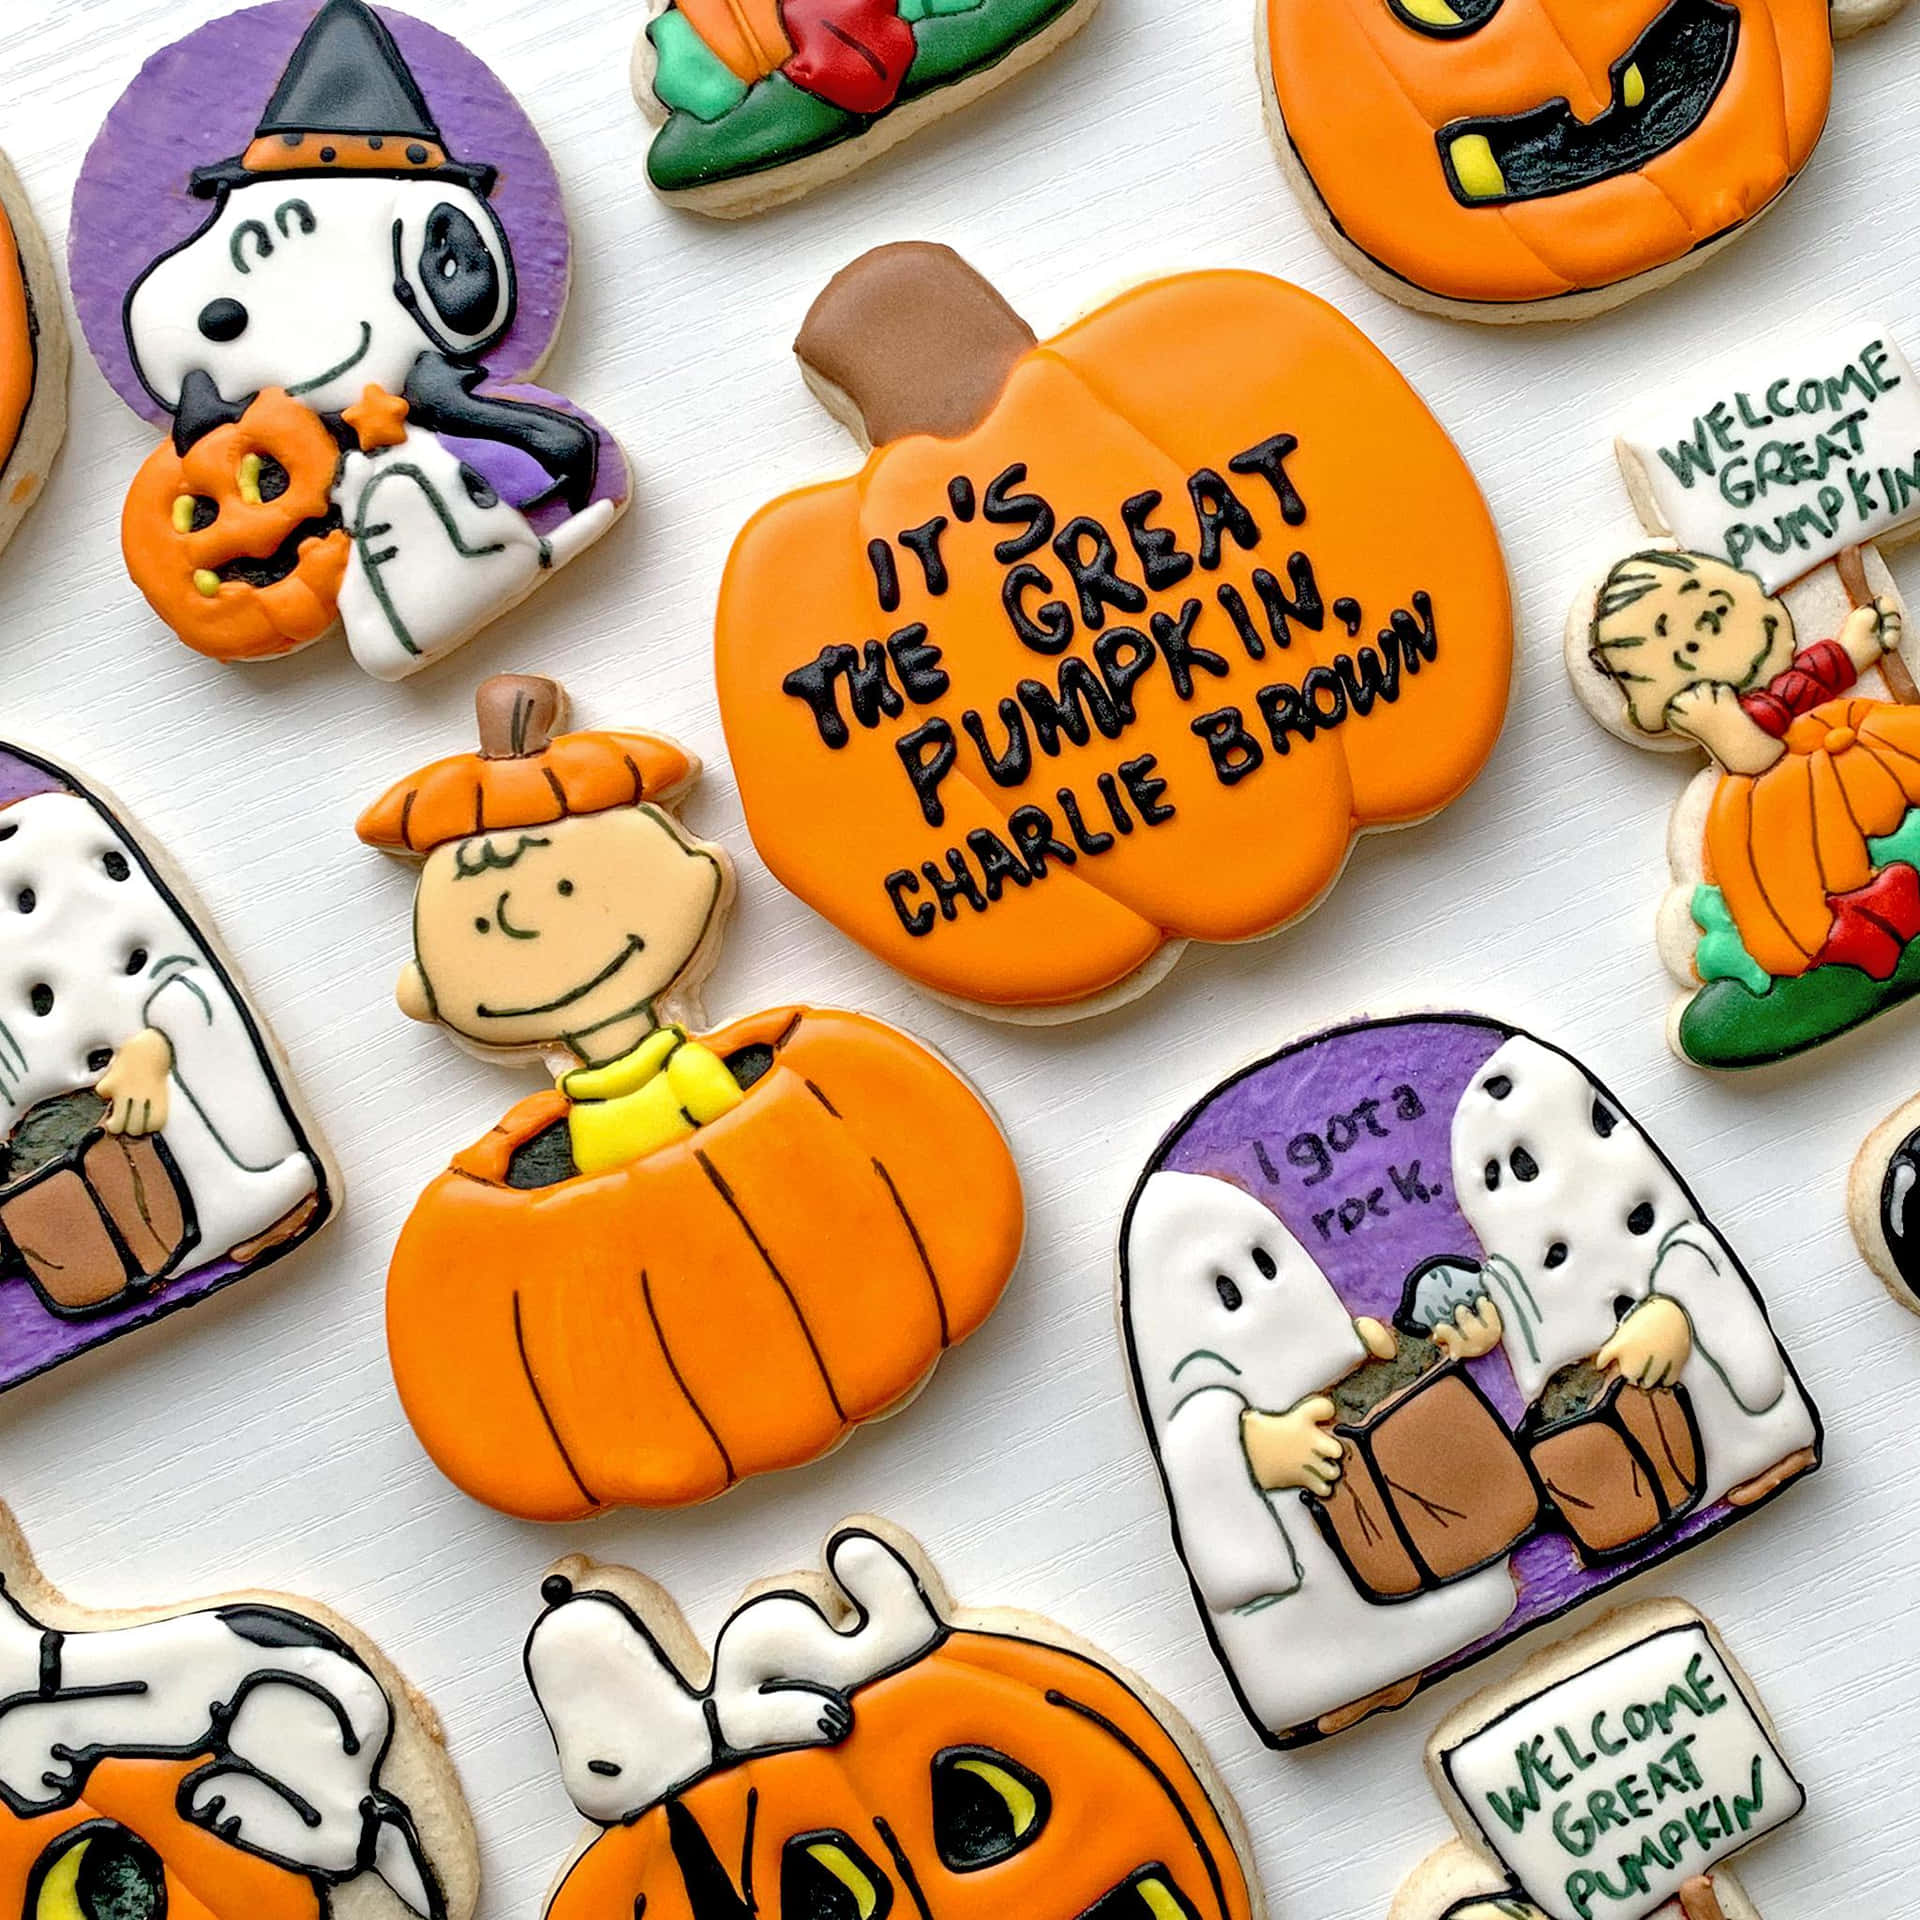 "Charlie Brown enjoys the spookiness of Halloween!"